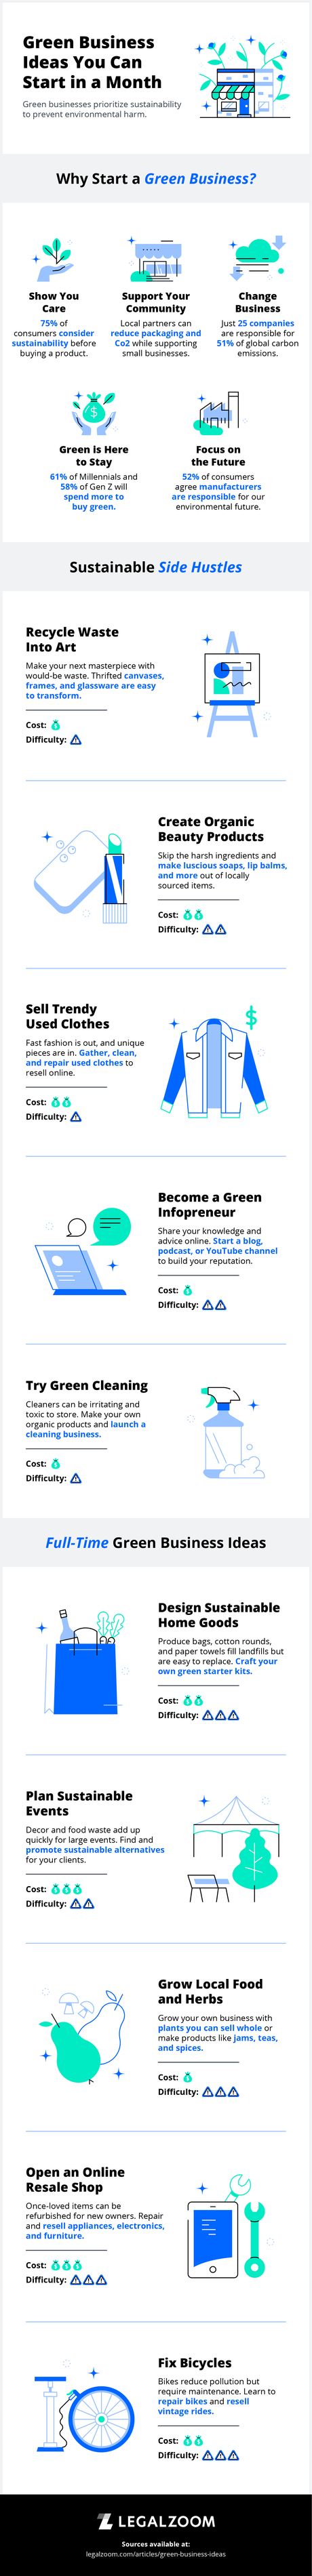 The Best Green Business Ideas (You Can Start Right Now)